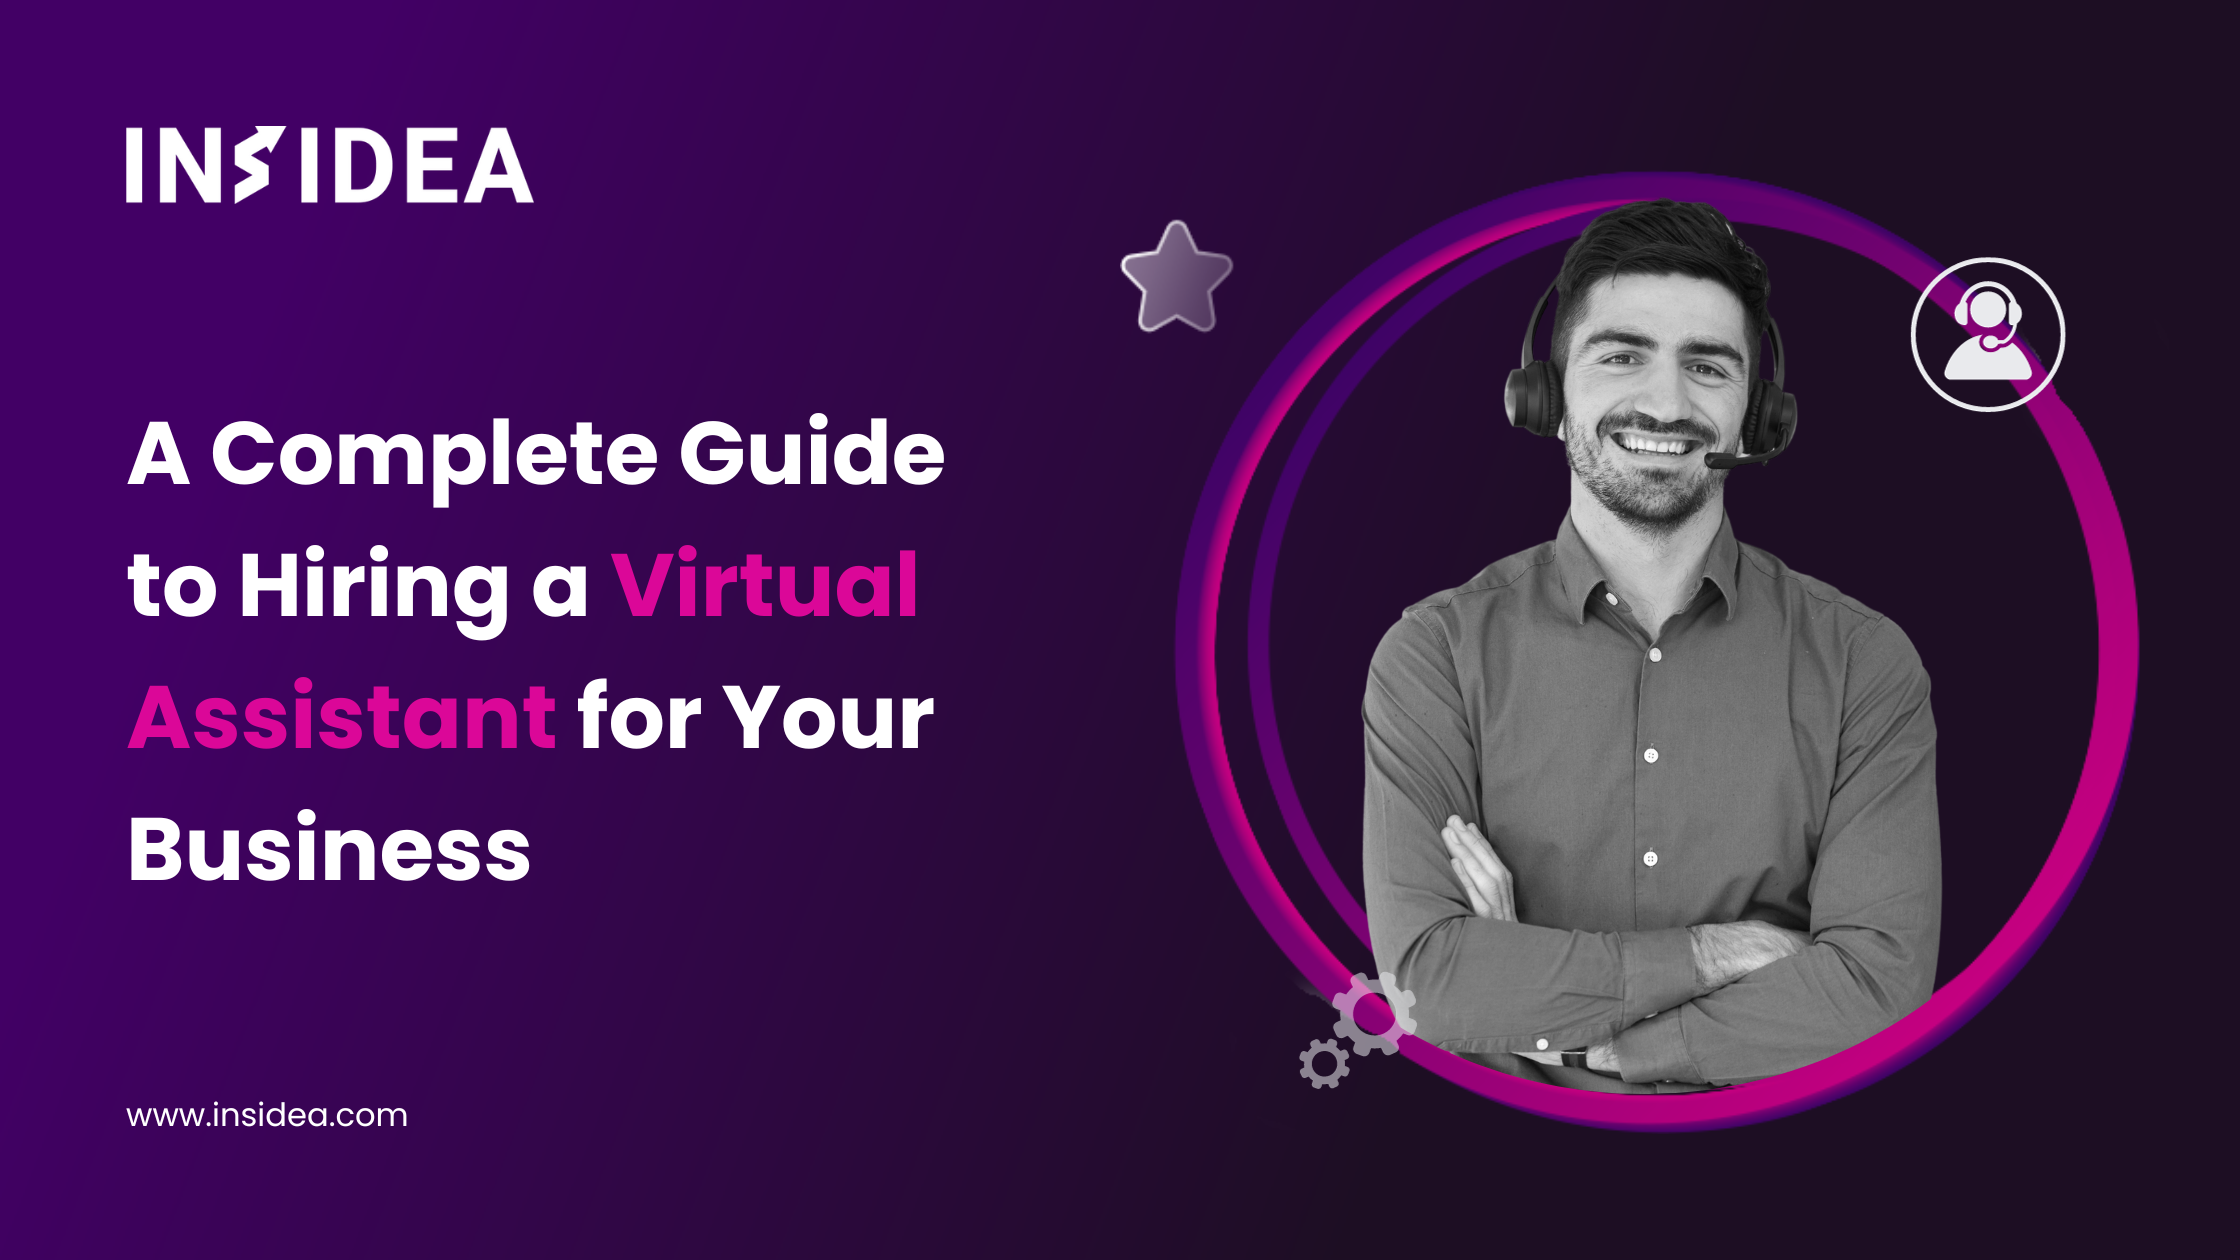 A Complete Guide to Hiring a Virtual Assistant for Your Business